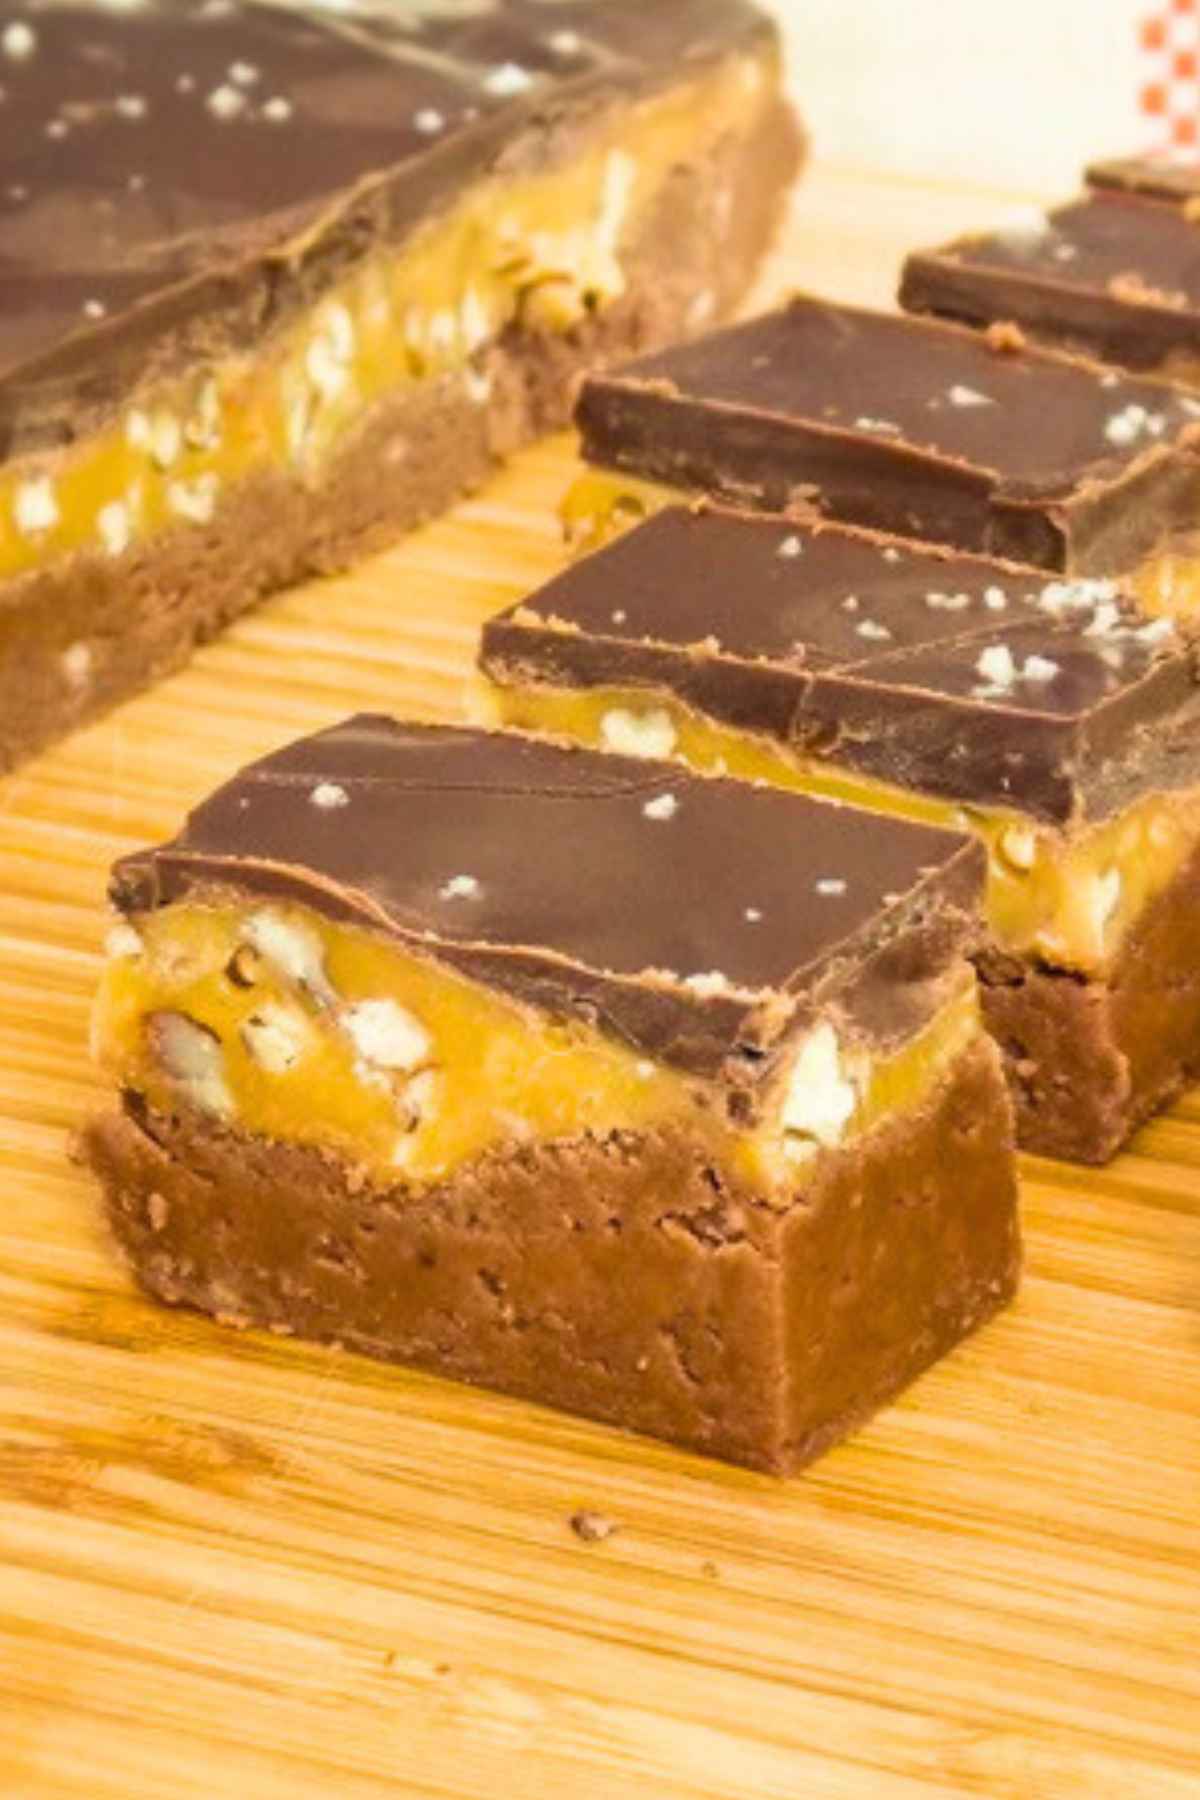 Upclose image for Bourbon Fudge recipe showing a chocolate fudge layer, a bourbon caramel praline layer, and dark chocolate topped with sea salt.